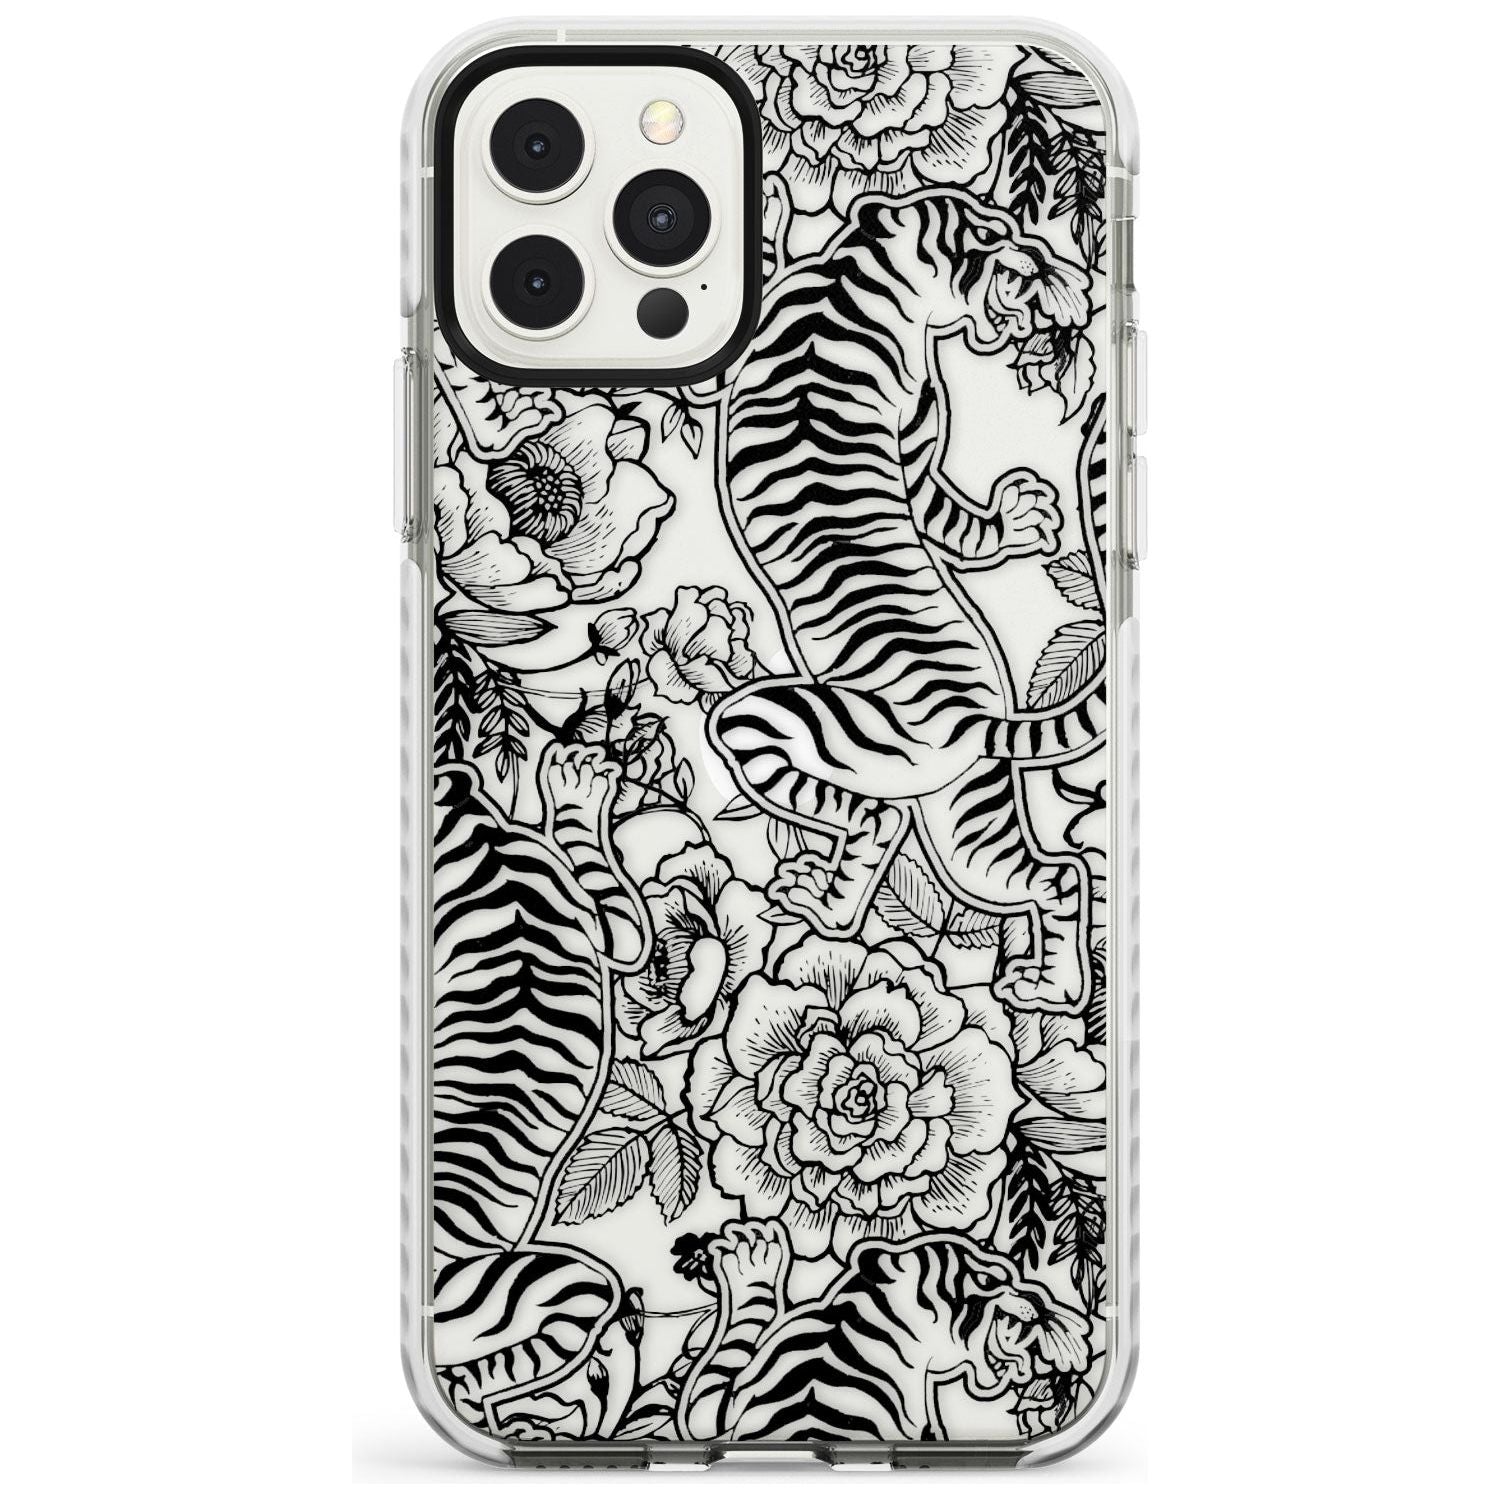 Personalised Chinese Tiger Pattern Impact Phone Case for iPhone 11 Pro Max